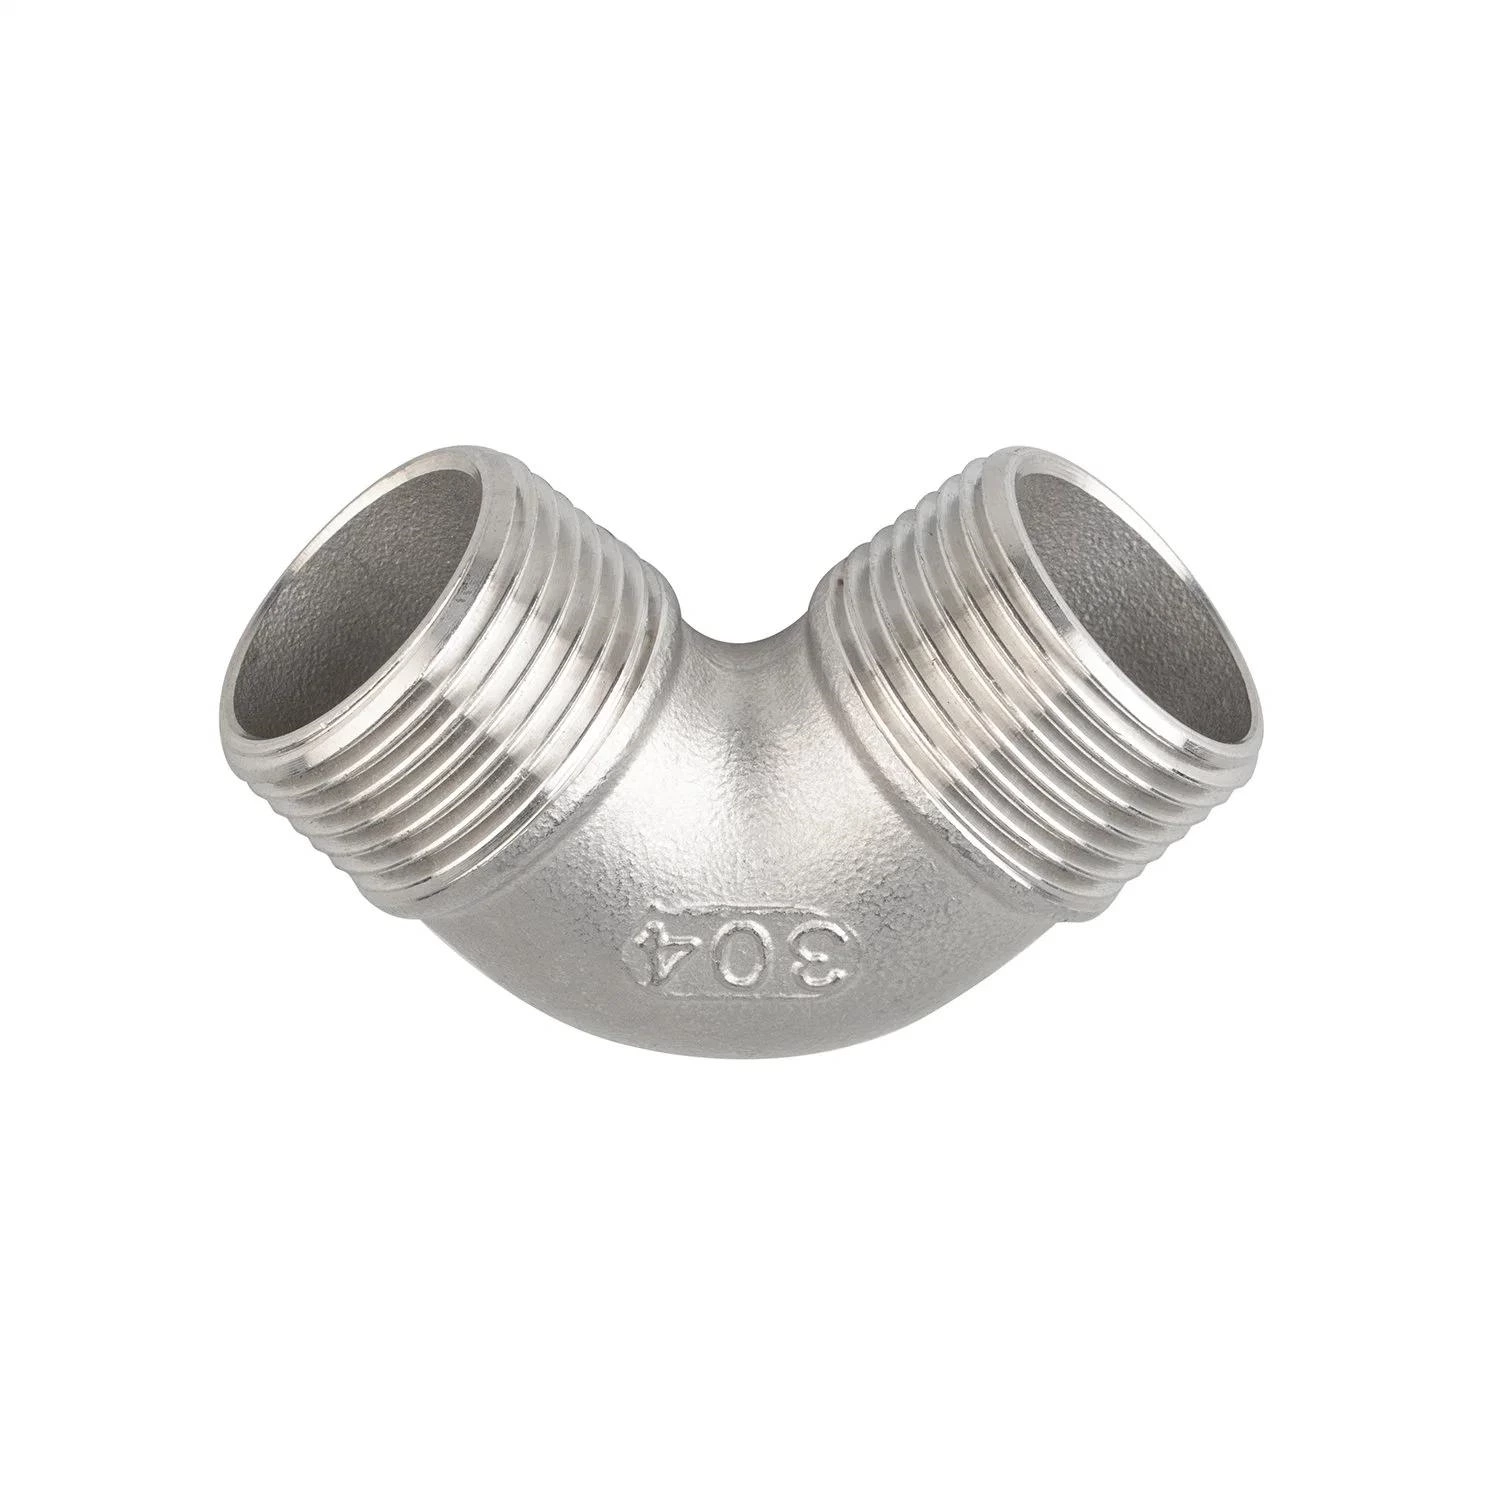 Stainless Steel Pipe Fitting Double Male Threaded 90 Elbow